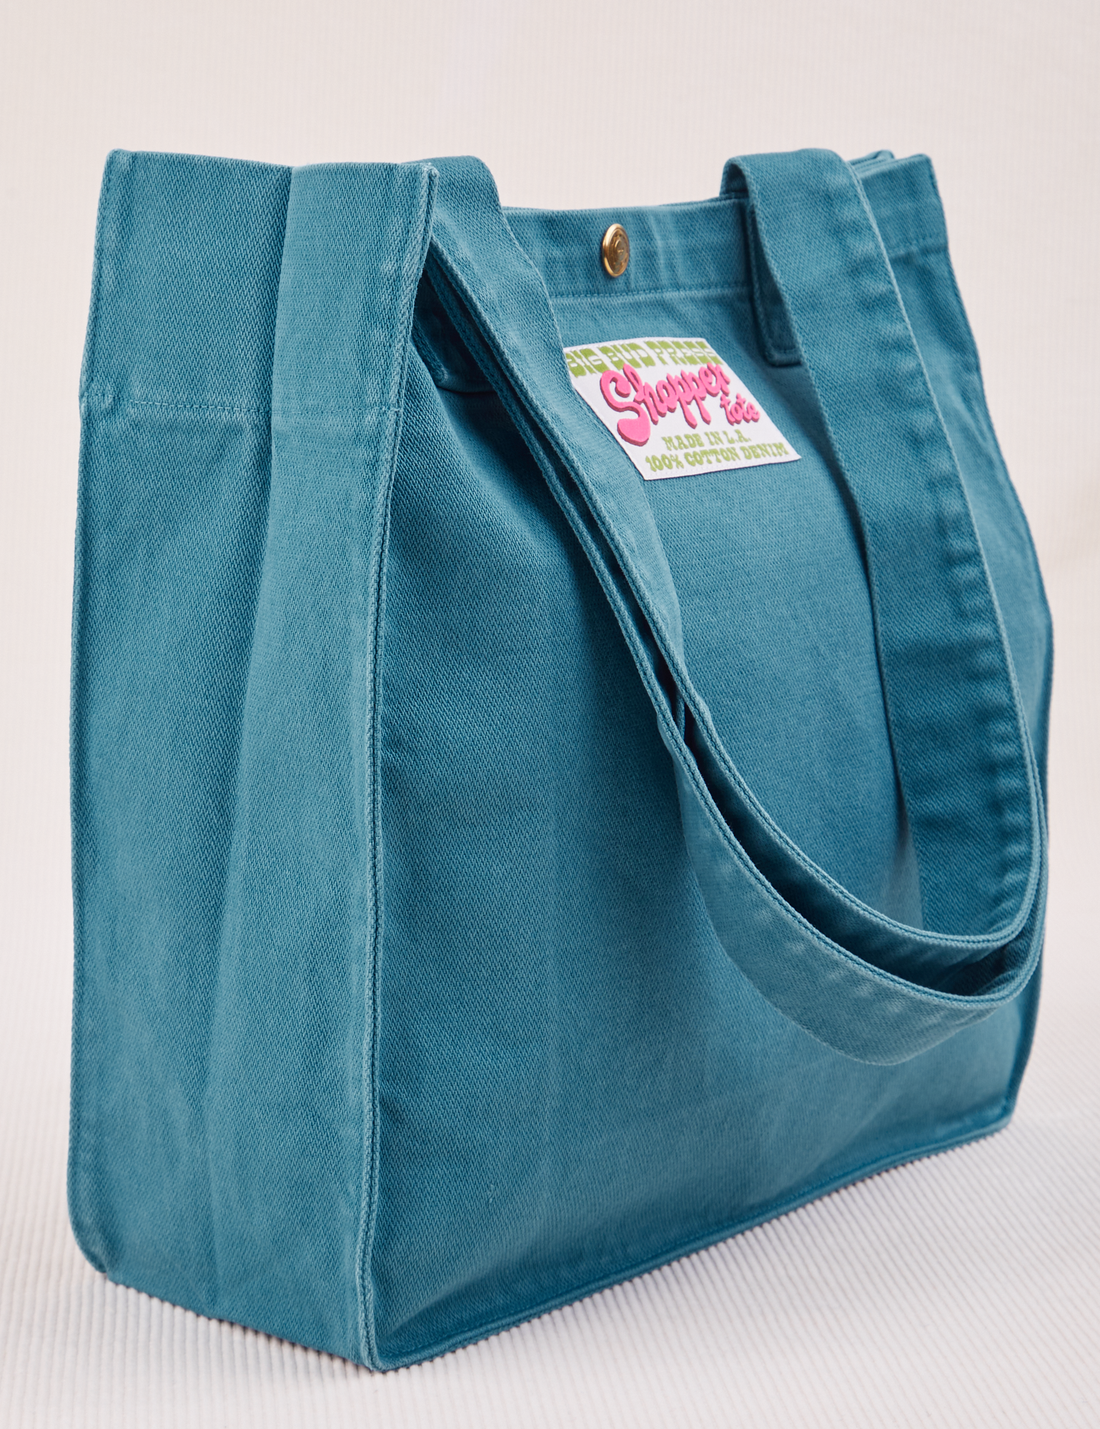 Angled view of Shopper Tote Bag in Marine Blue